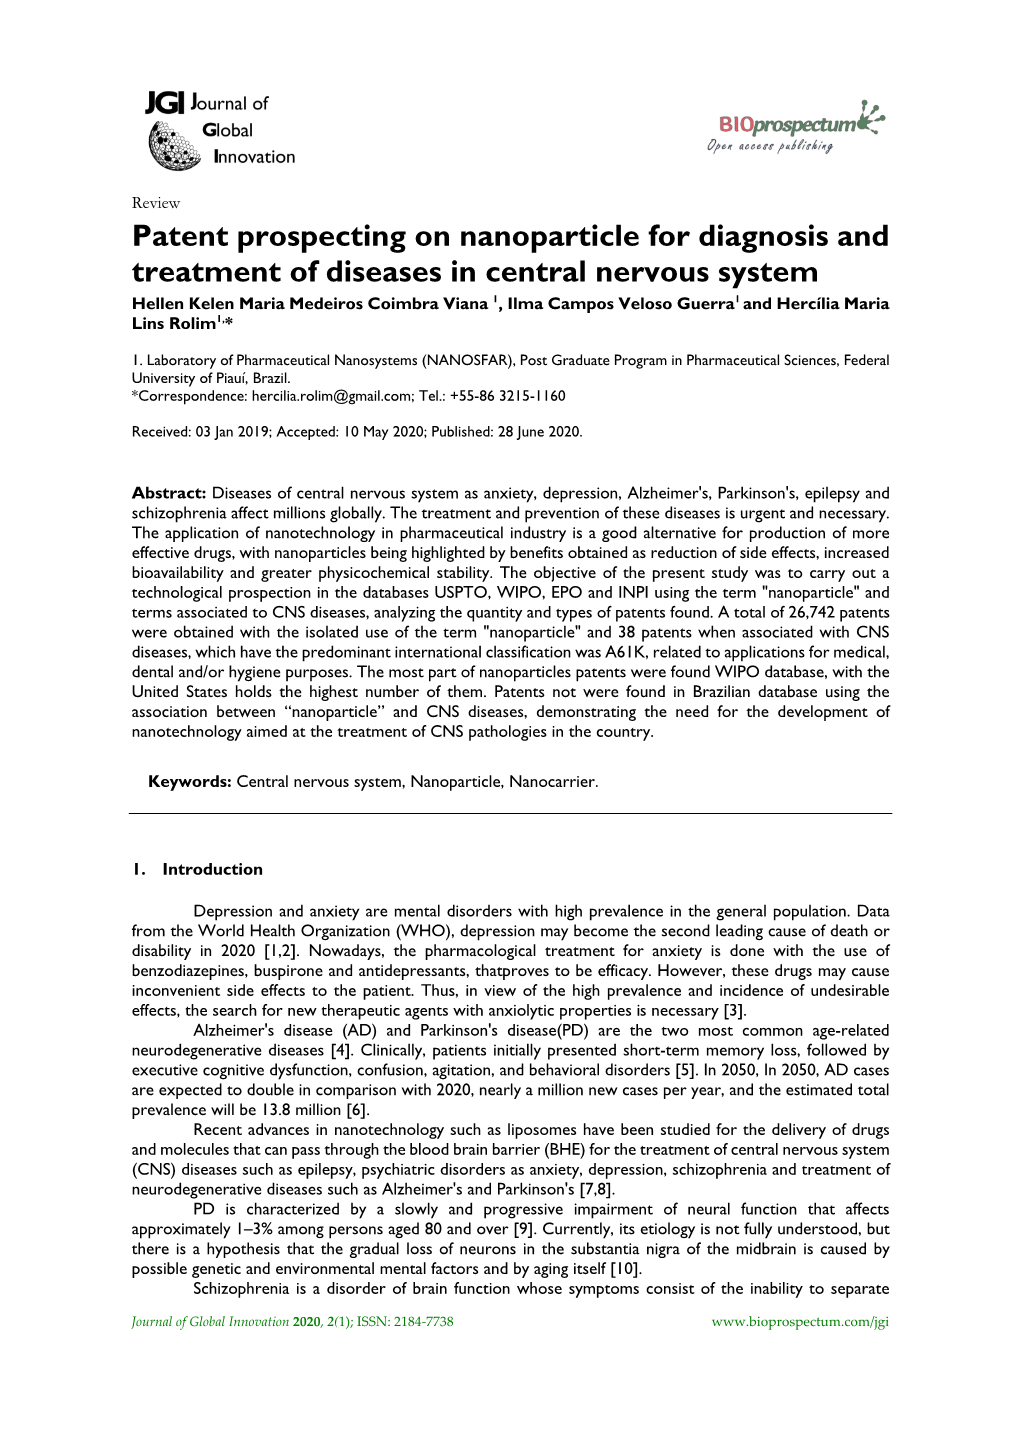 Patent Prospecting on Nanoparticle for Diagnosis and Treatment Of